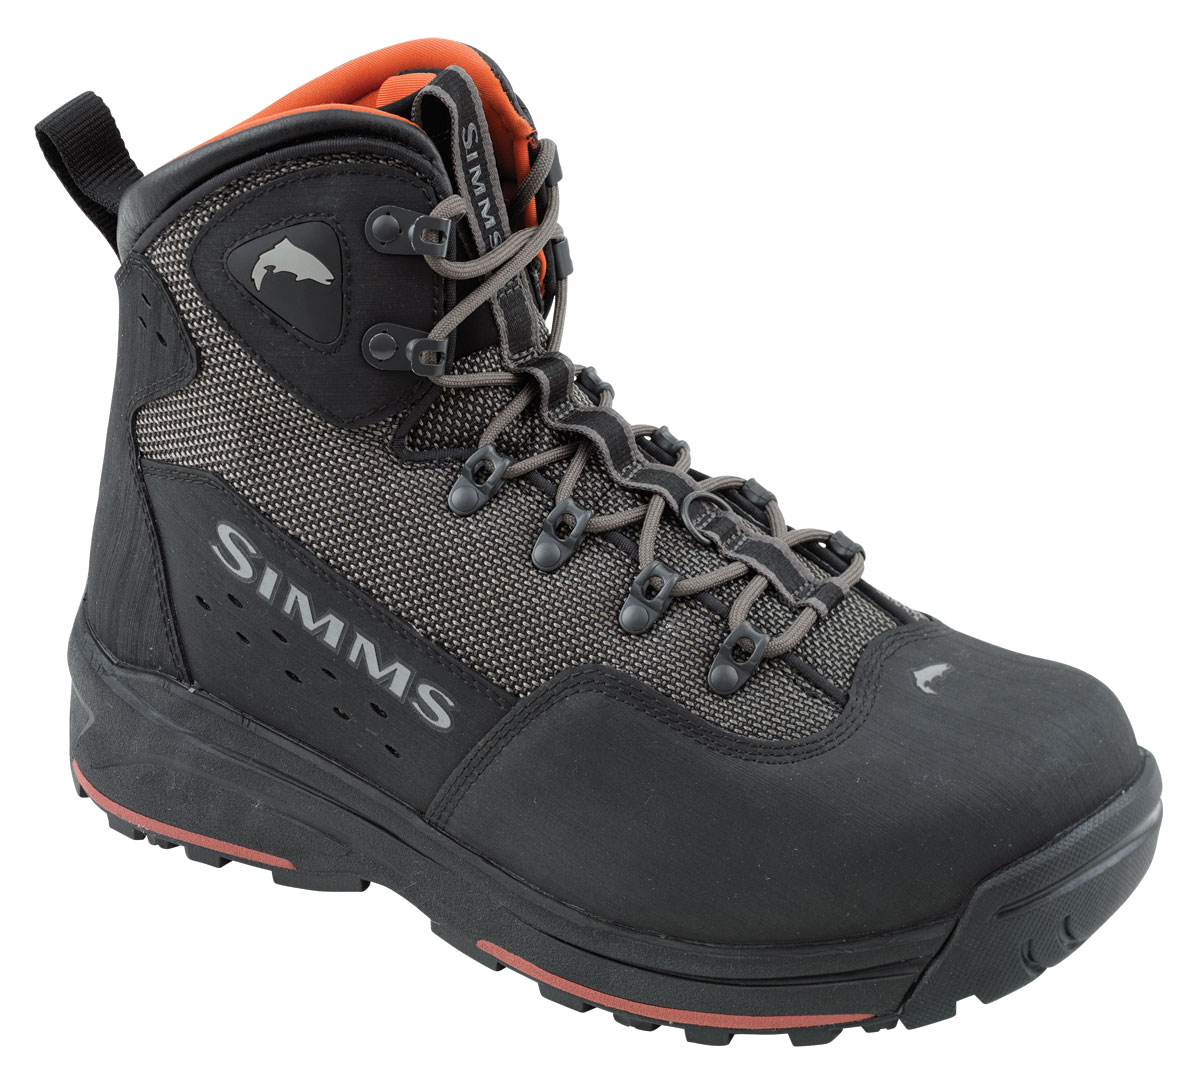 Simms-Headwaters-Boots.jpg